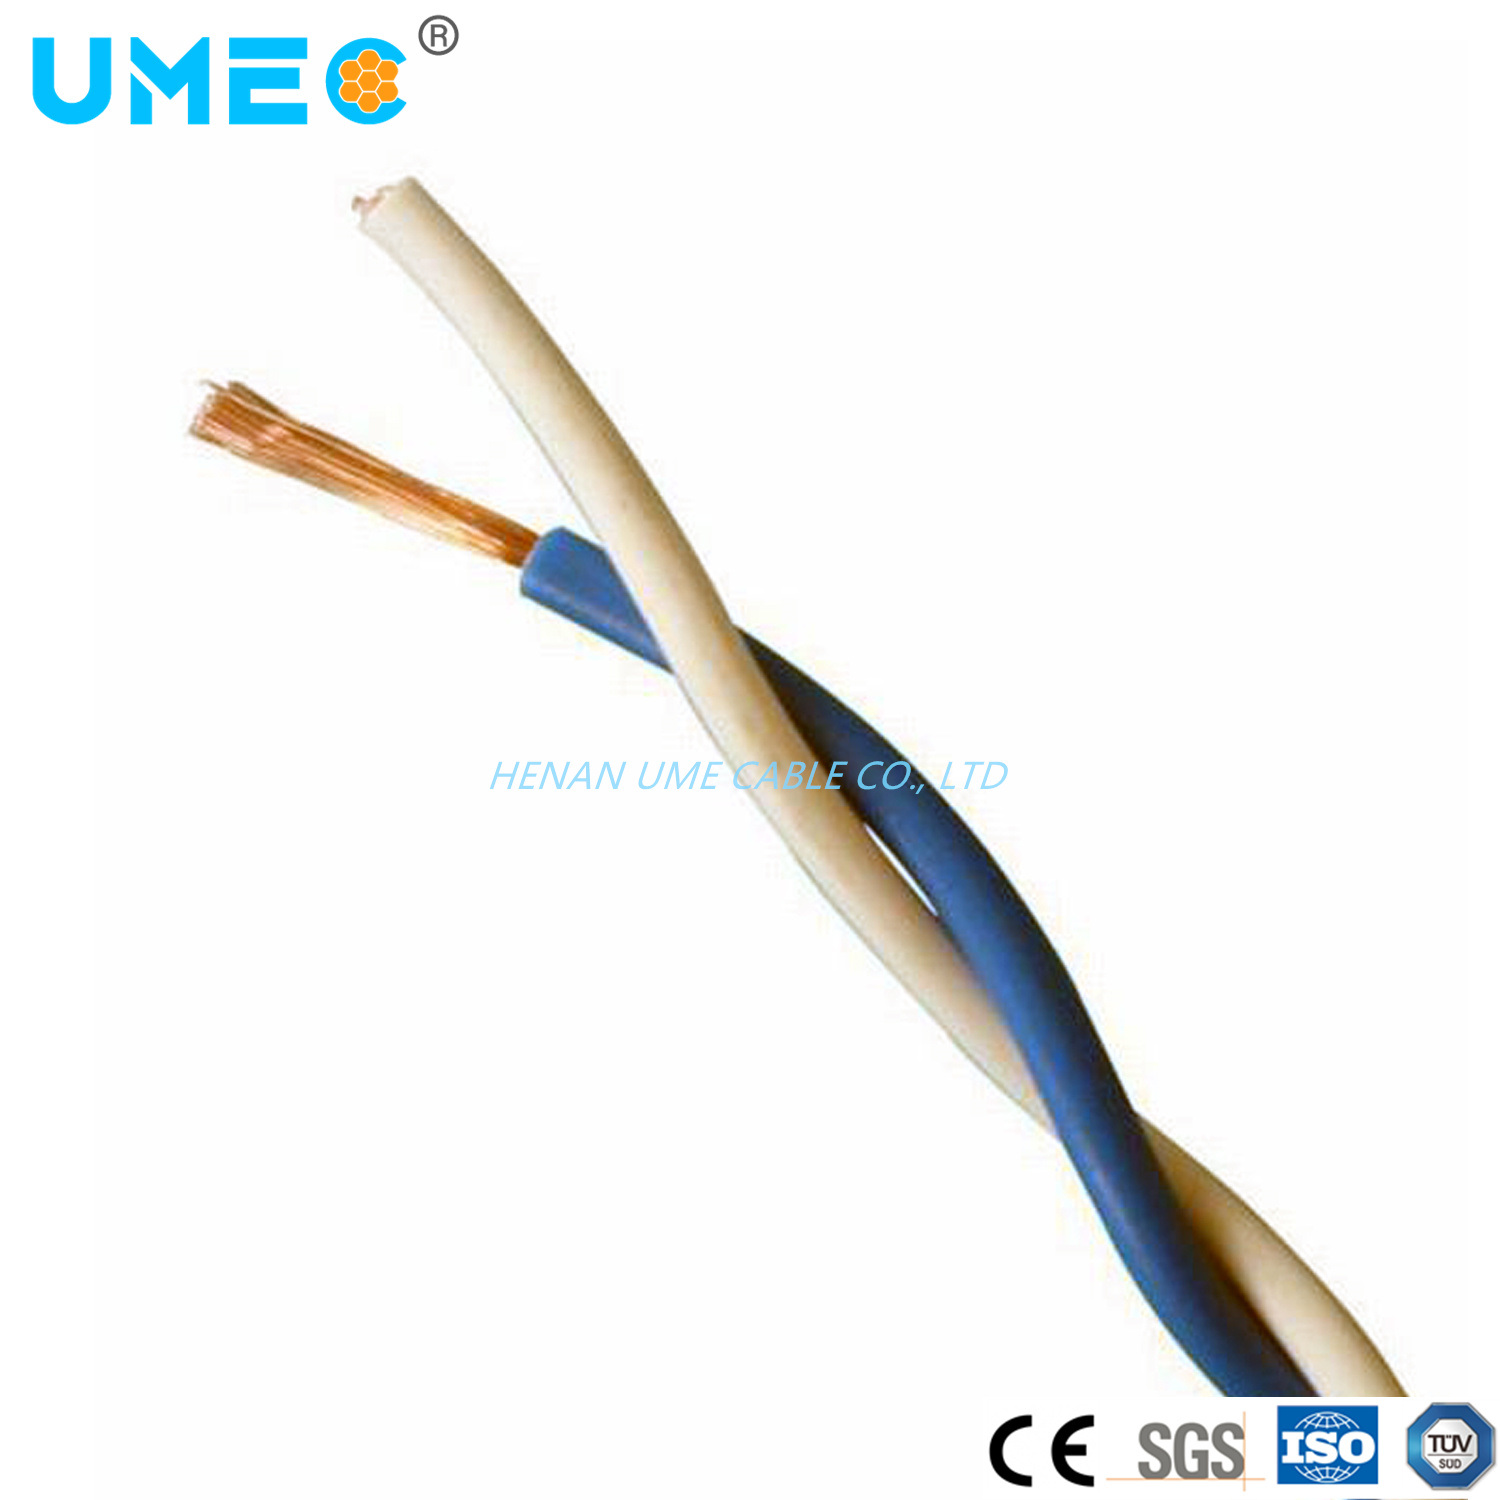 IEC60227 Standard Two Conductor Twisted Wire Braided Cable Textile Wire2X0.75 2X1.0 2X1.5mm2 Rvs Wire